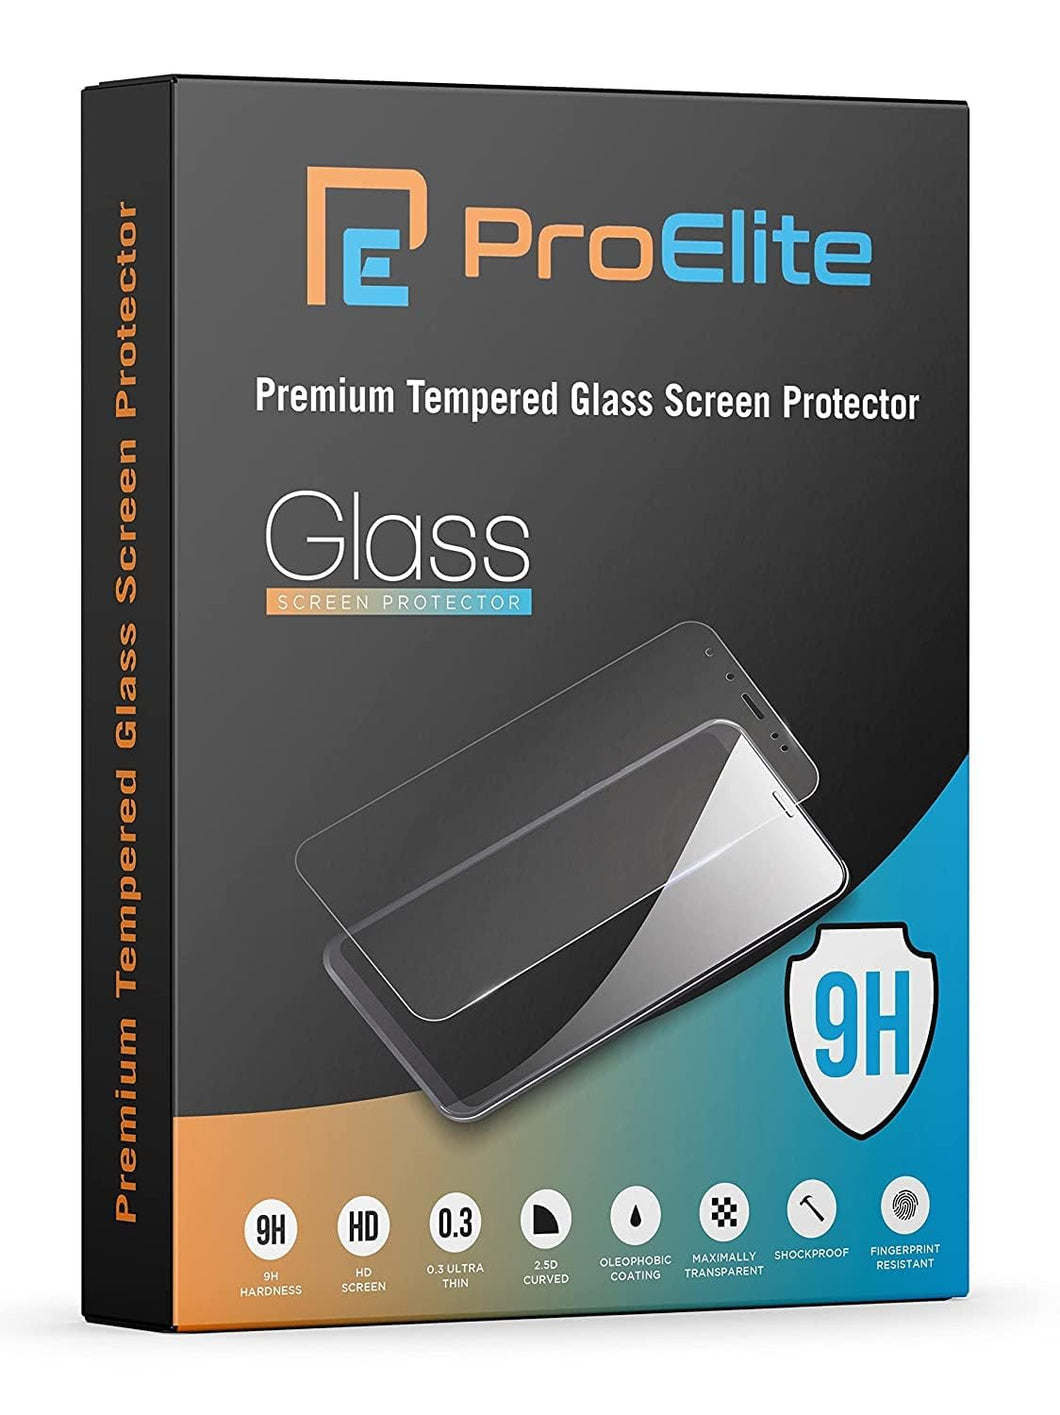 [2-Pack] ProElite Premium Tempered Glass Screen Protector for Samsung Galaxy Tab A 10.1 inch SM-T510/T515